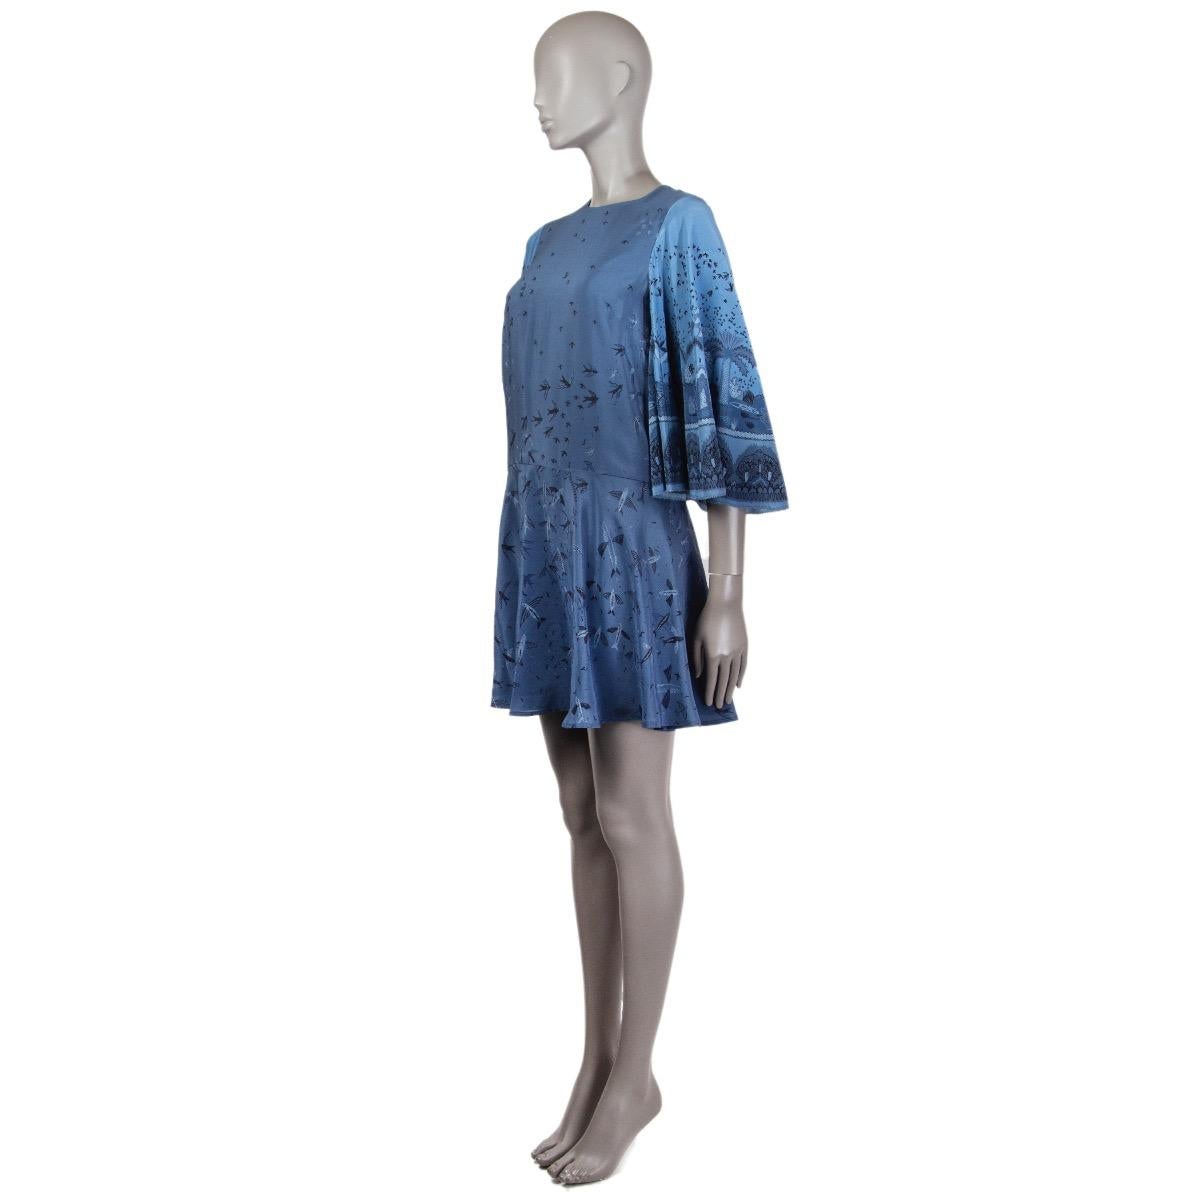 Valentino dress in soldier and pigeon blue silk (100% - content tag is missing) with bell sleeves. Zandra Rhodes bird print inspired by Hieronymus Bosch for Spring 2017. Closes with a concealed zipper and a hook on the back. Has been worn and is in